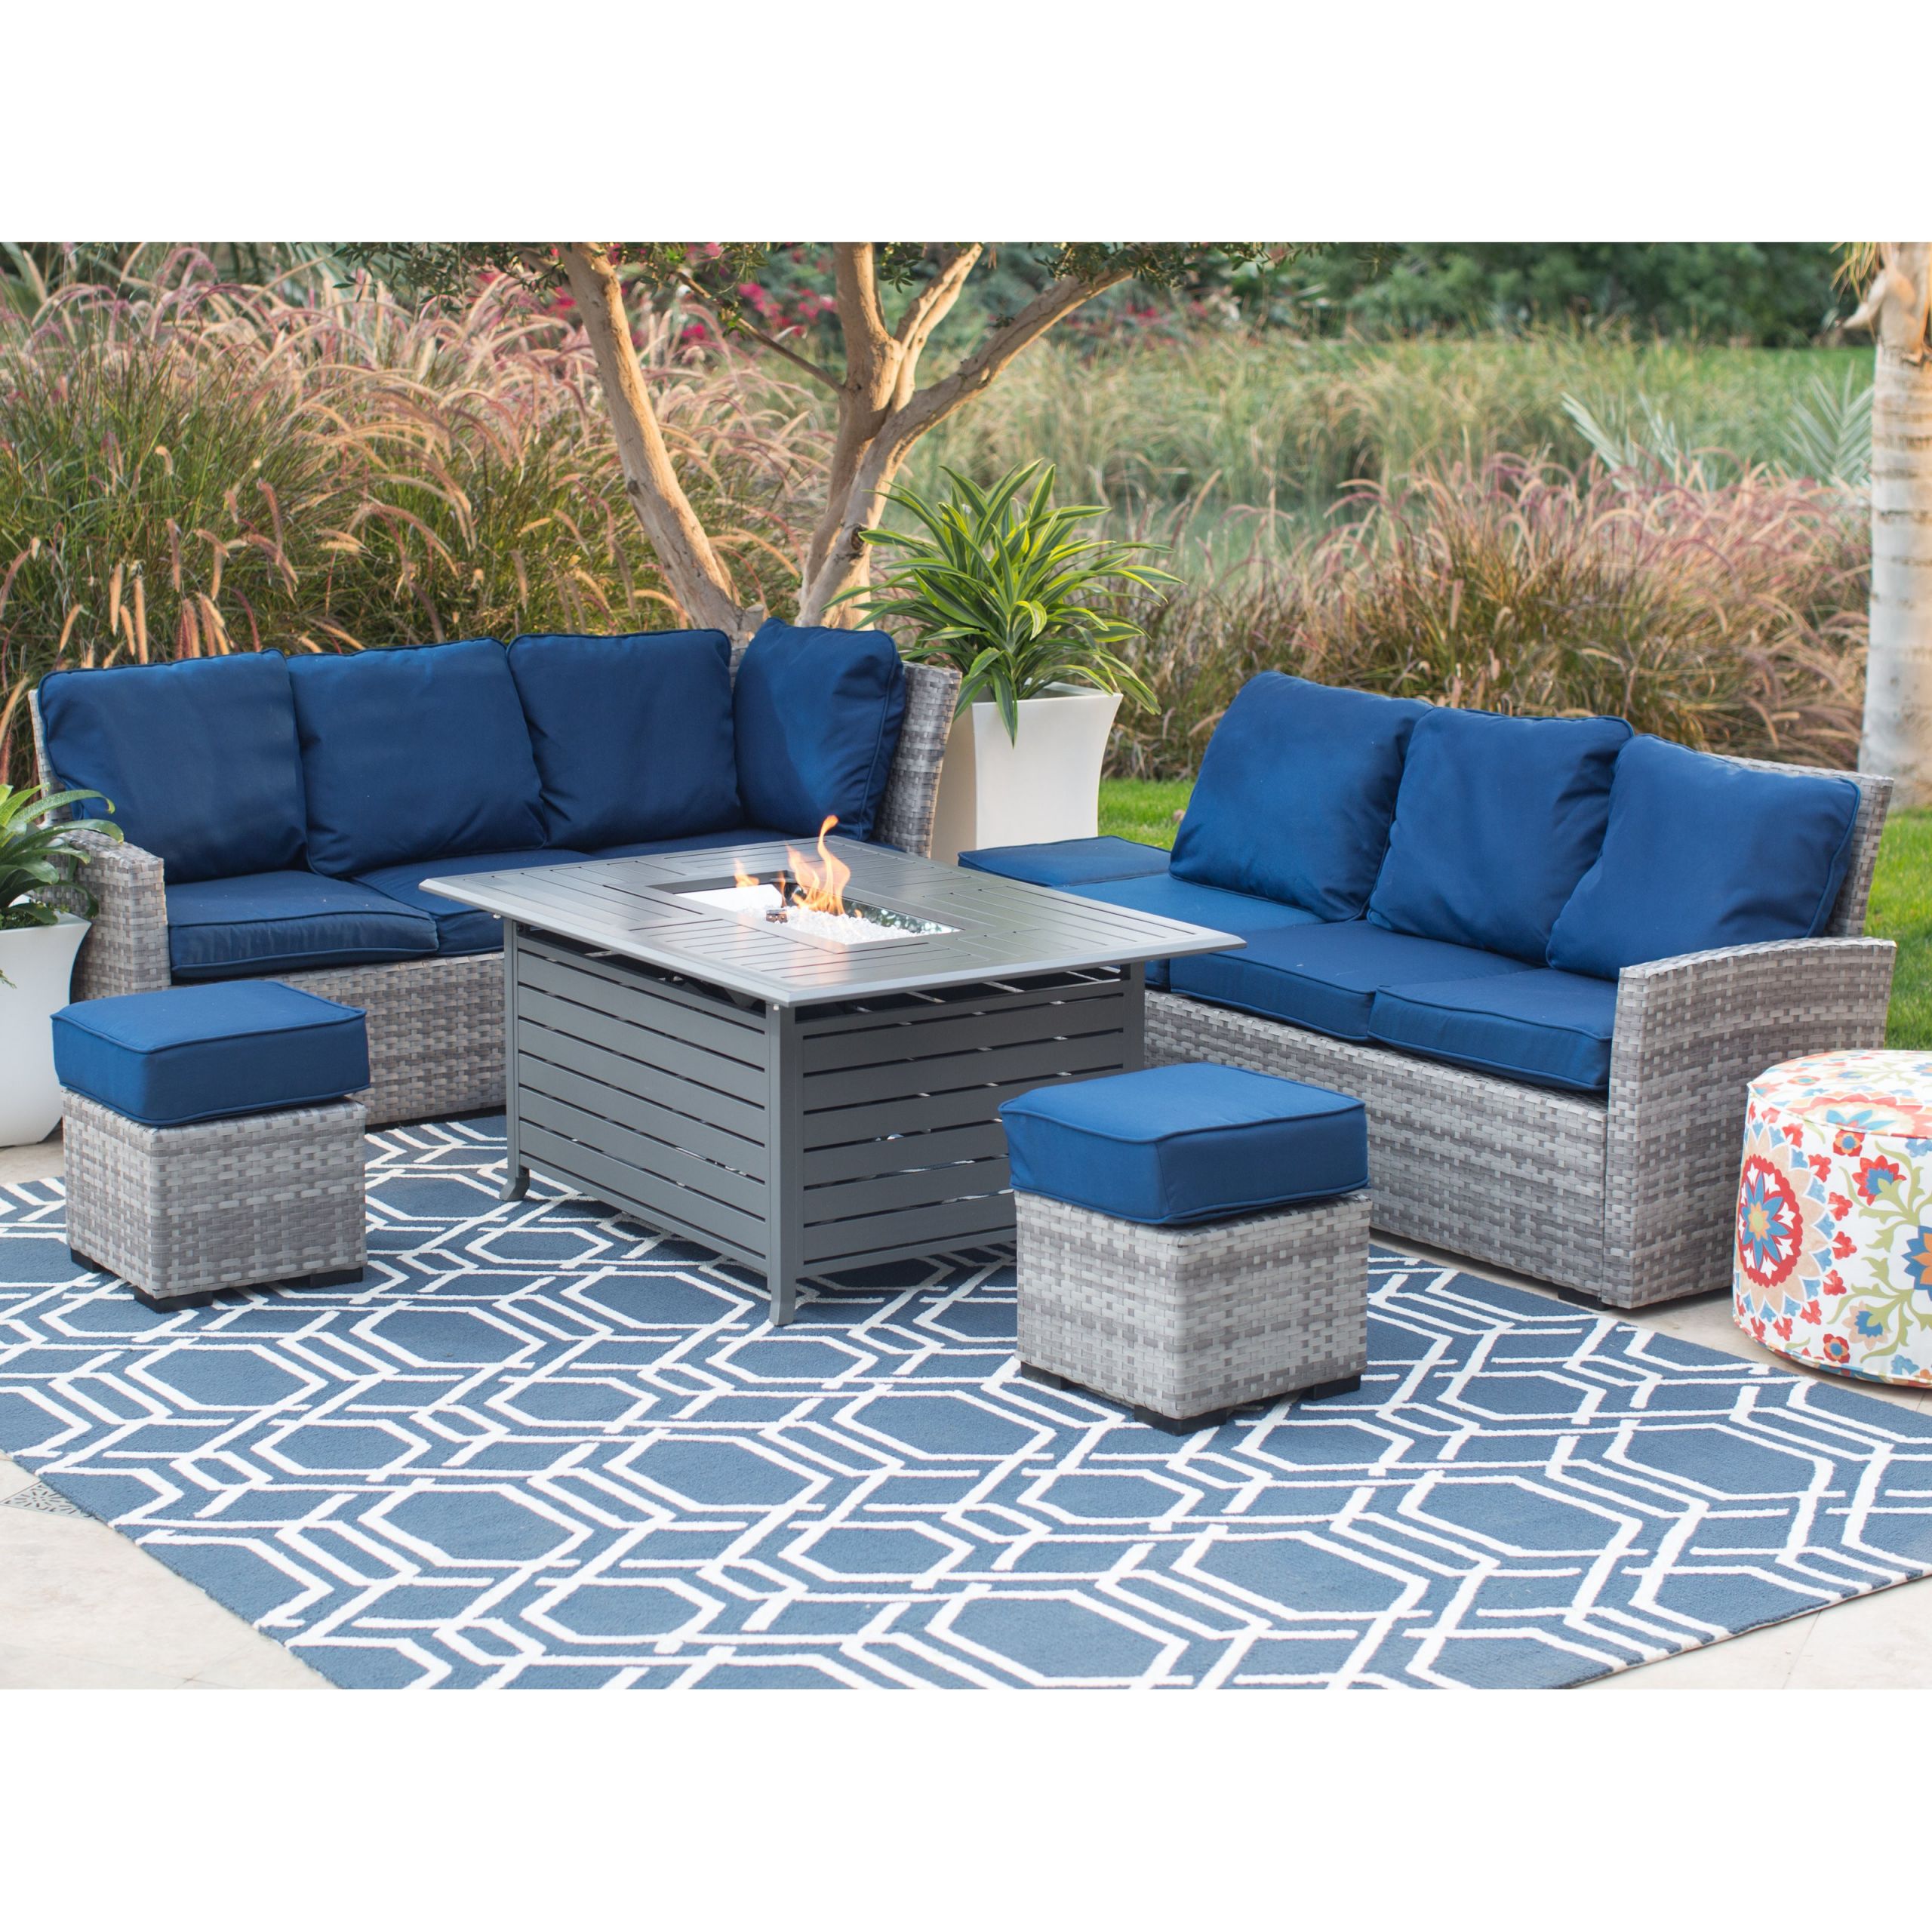 Patio Sets With Fire Pit
 Belham Living Brookville All Weather Wicker Sofa with